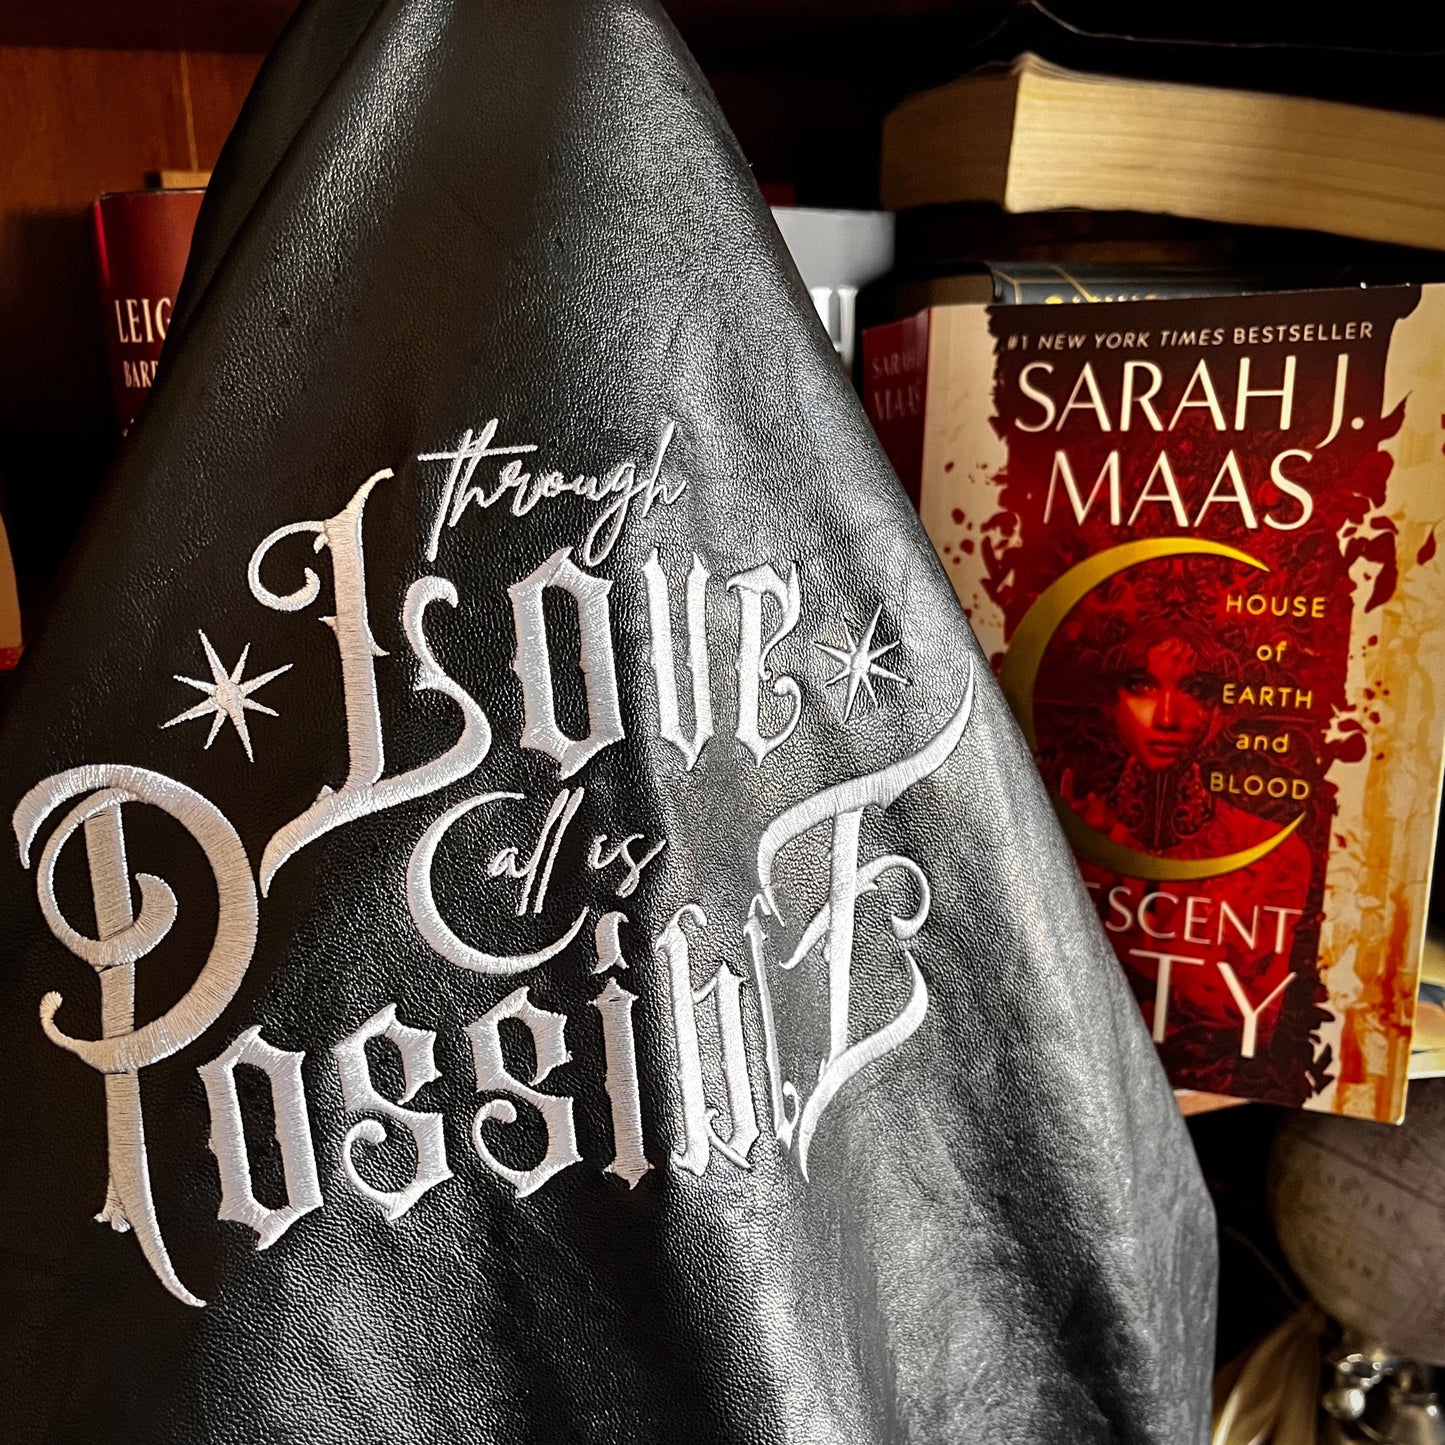 Crescent City - Faux Leather Bomber Jacket - Through Love All Is Possible